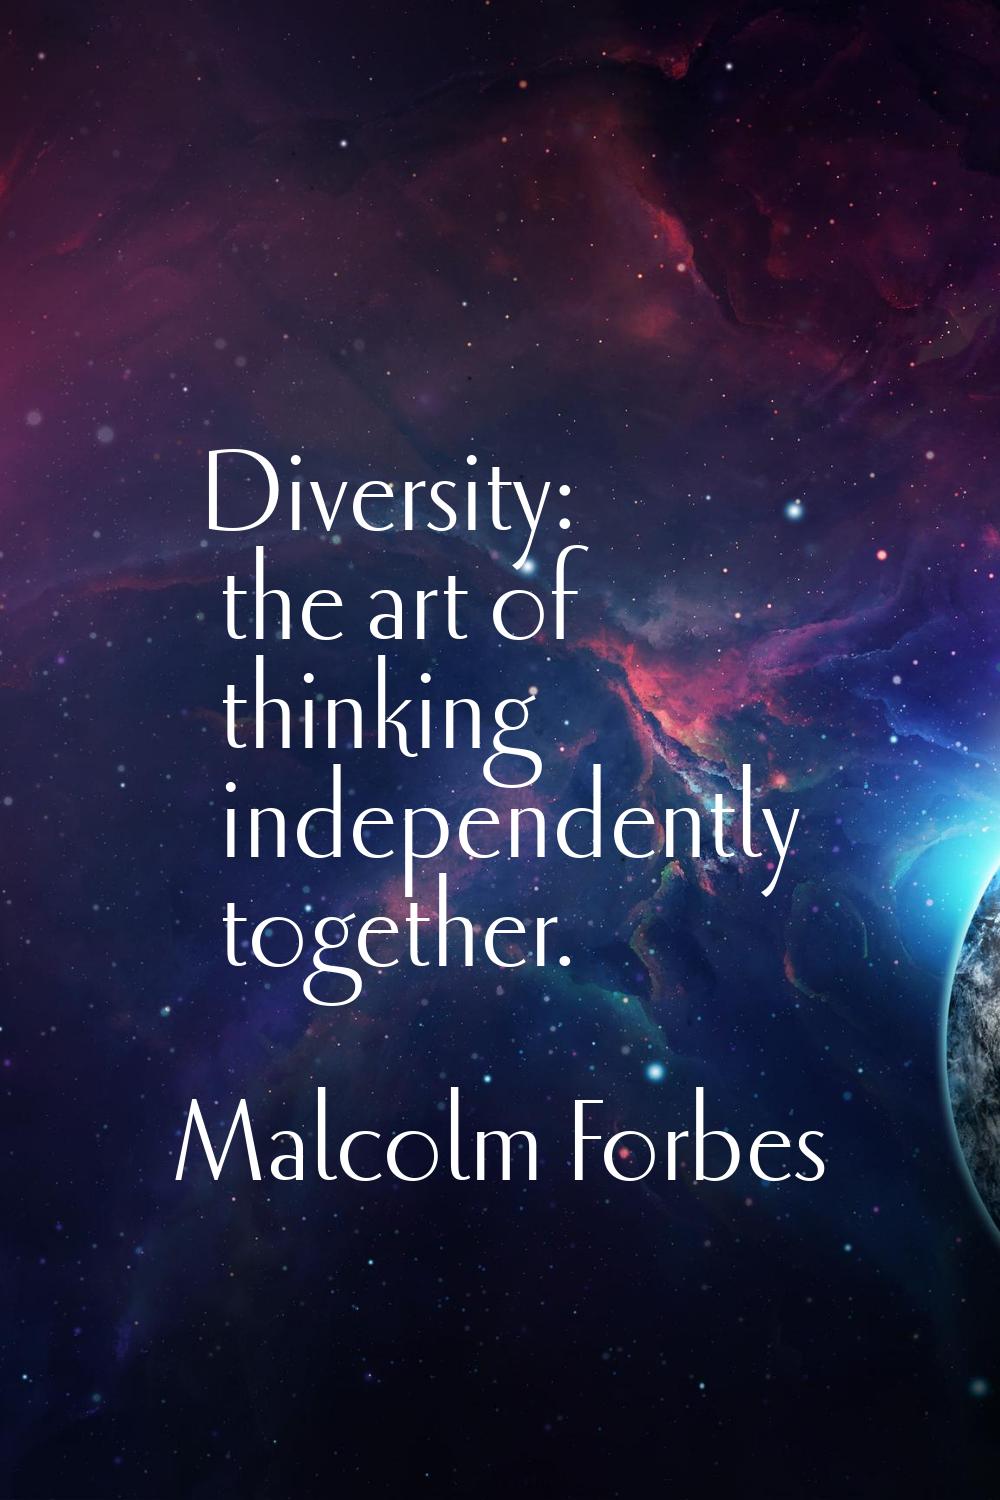 Diversity: the art of thinking independently together.